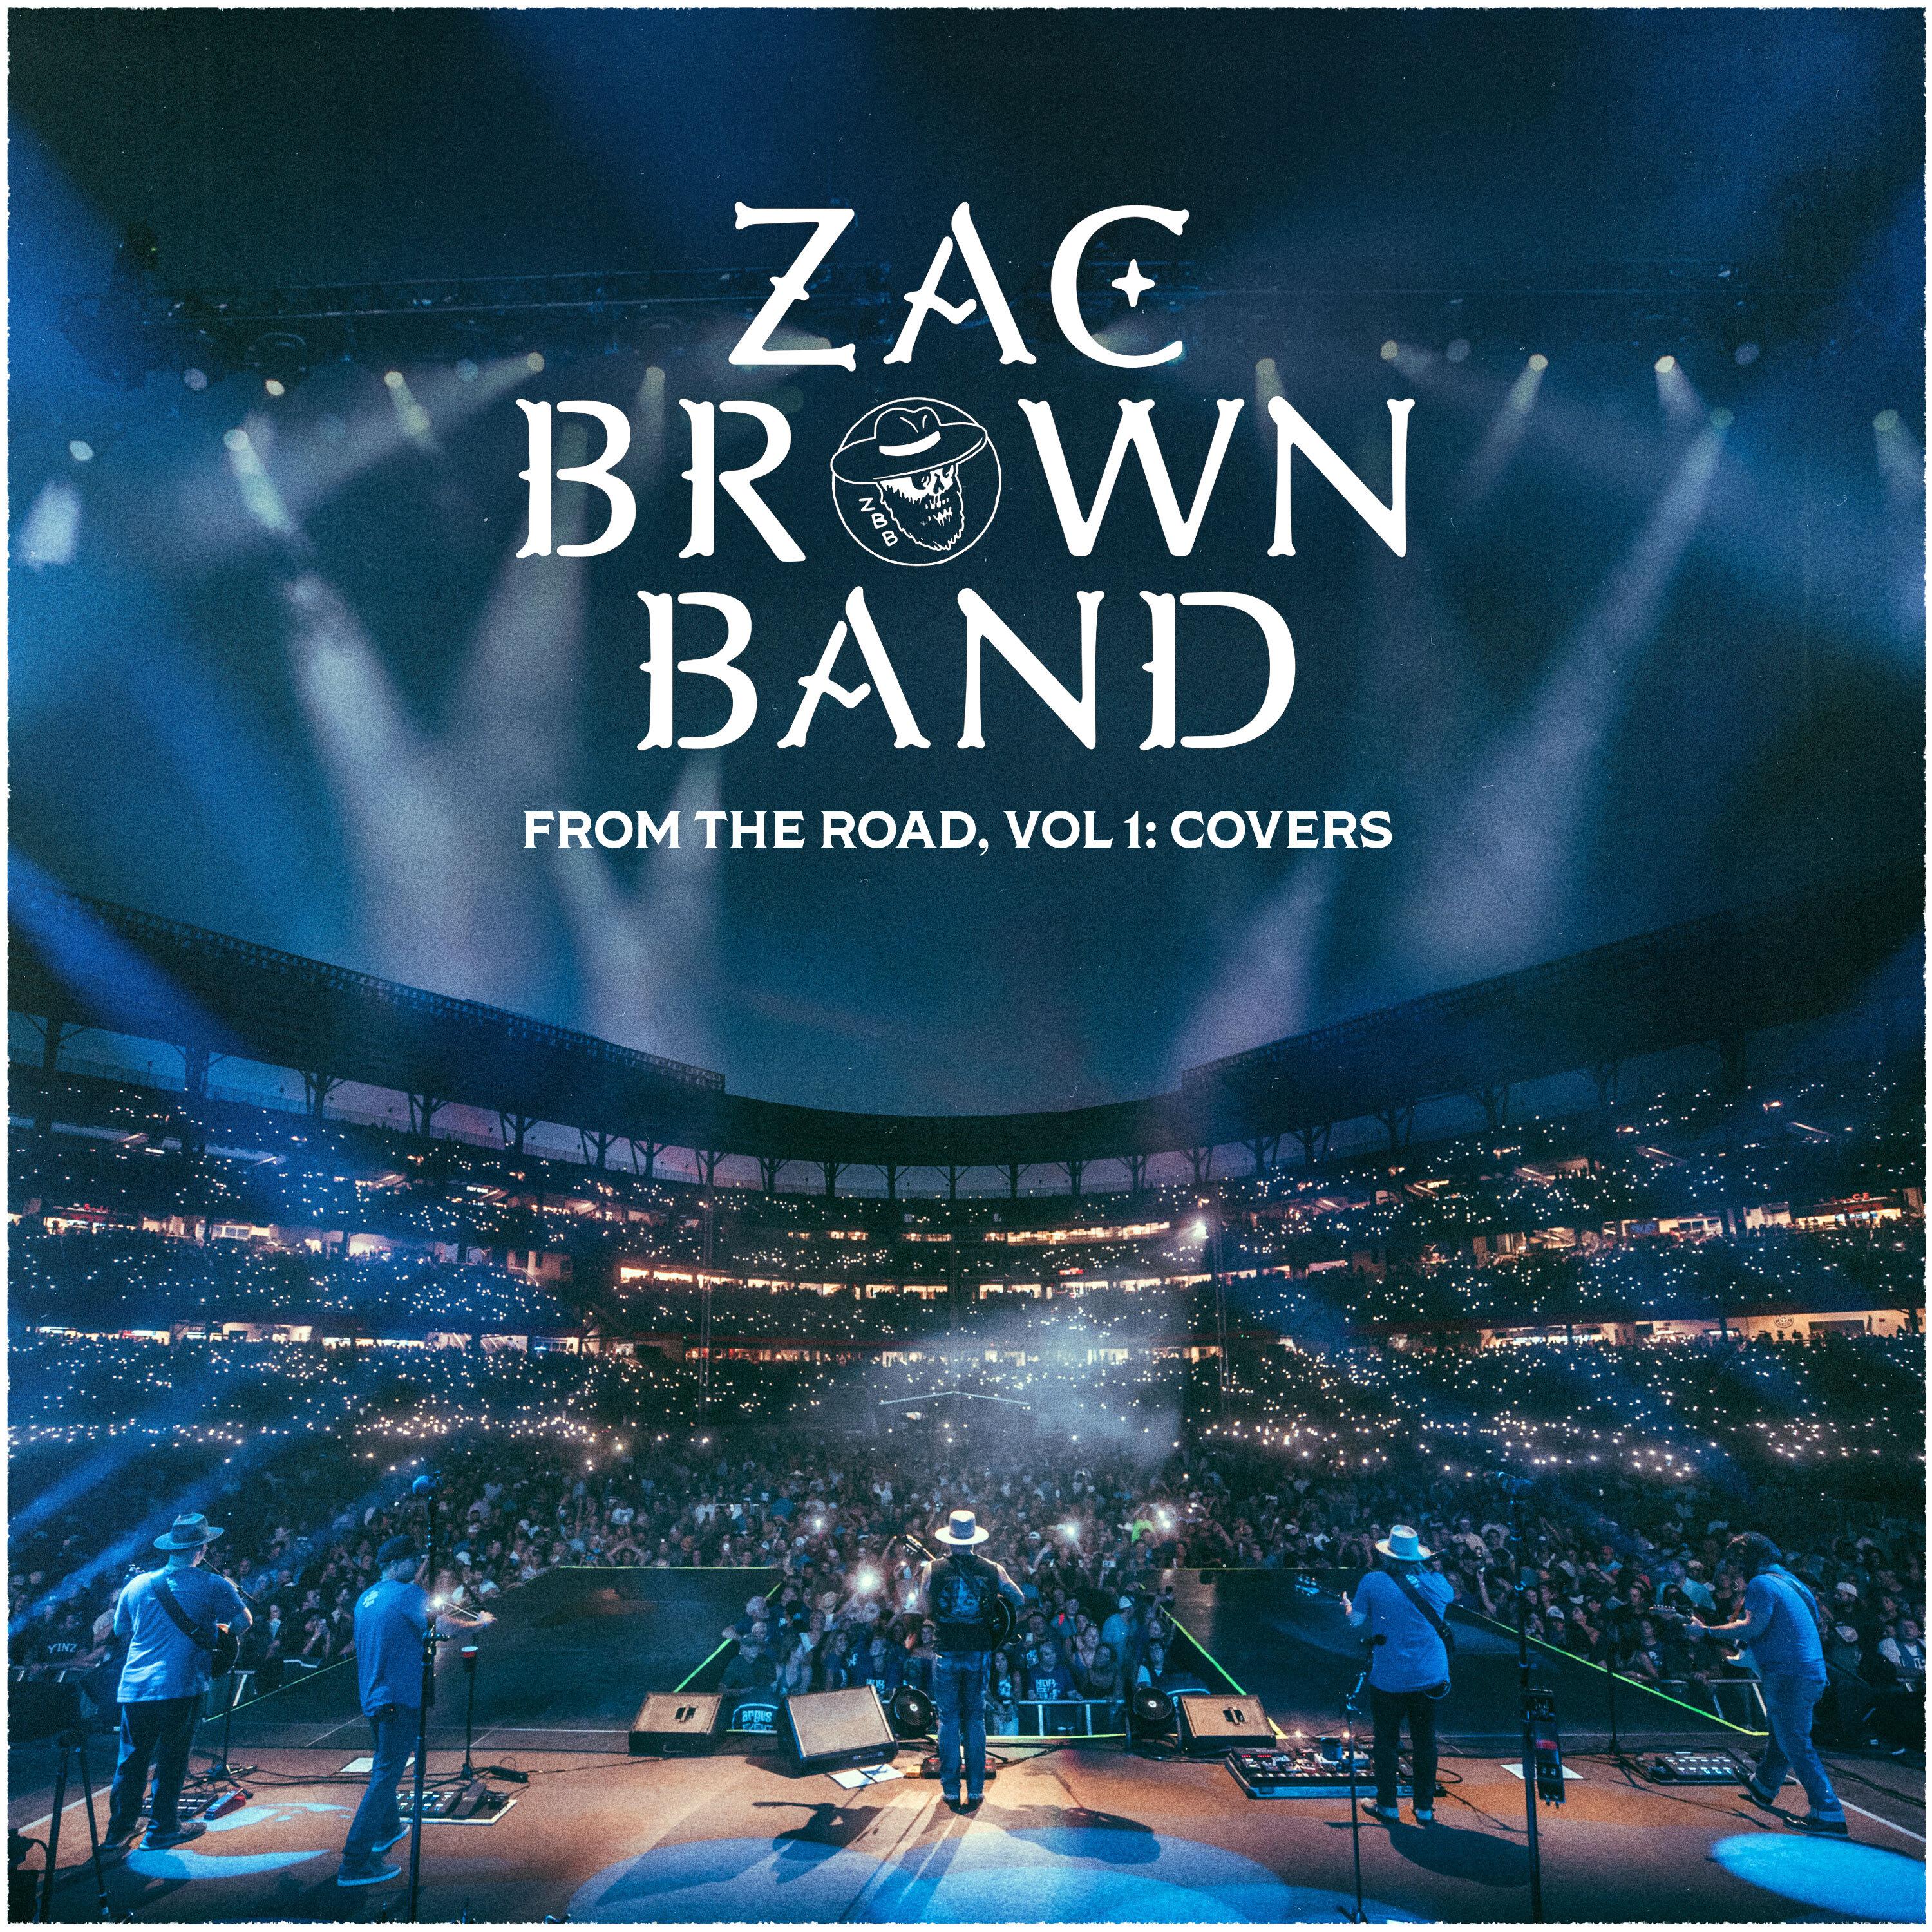 Zac Brown Band - Sweet Emotion (featuring Steven Tyler) (Live at Fenway Park, Boston, MA, 08.09.2015)